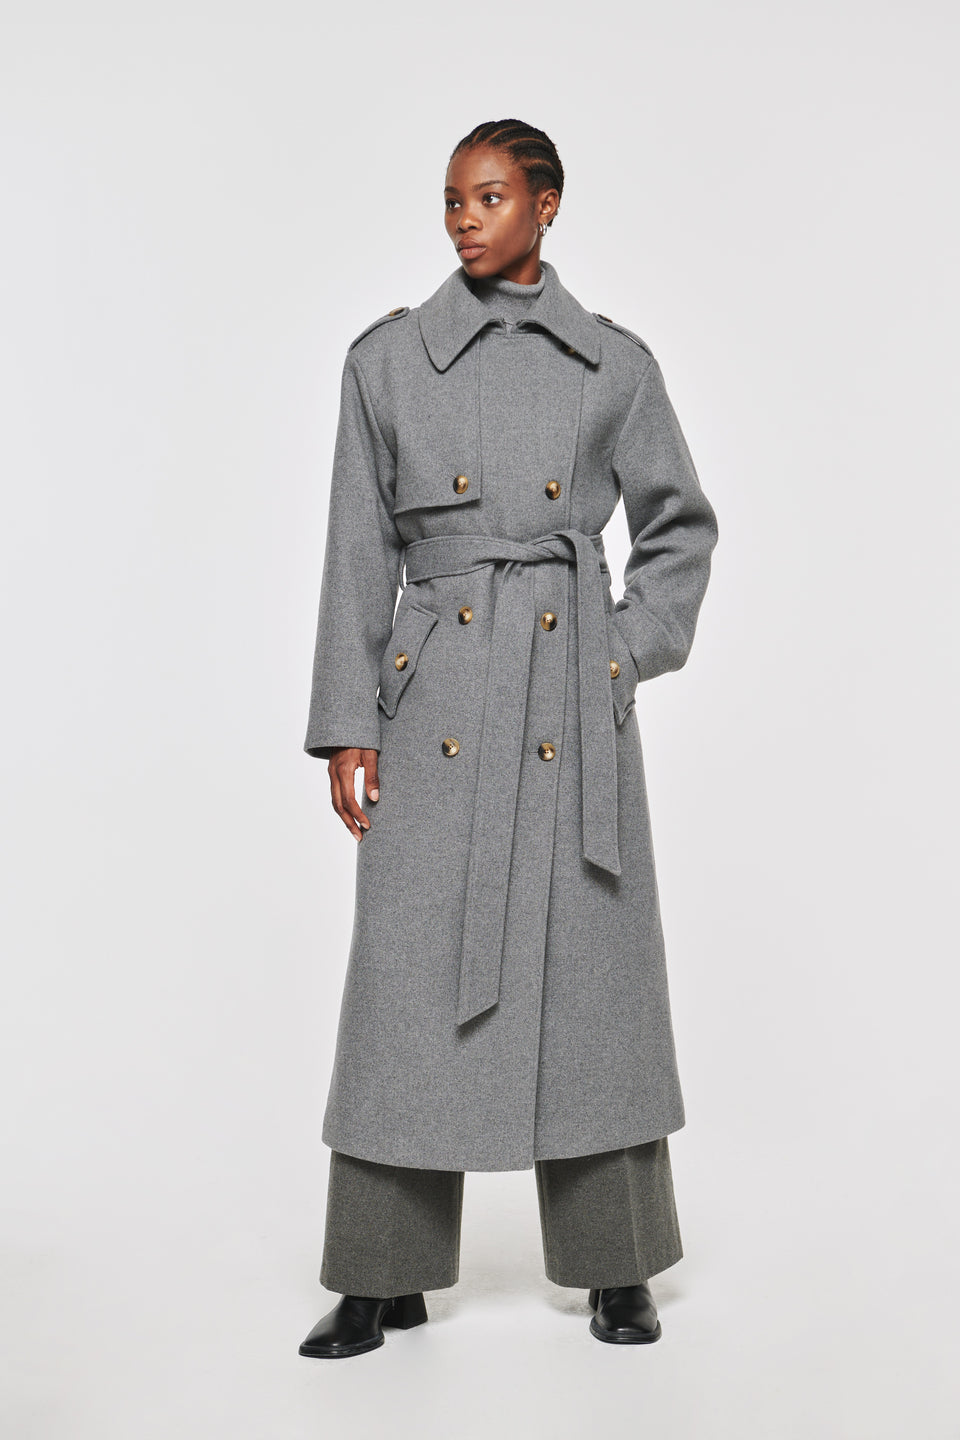 8 types of coats that never go out of style. Aligne classic, full-length trench coat, in grey wool. Finished with features like storm flaps, contrast buttons and epaulettes, it's designed to be a statement-making piece. Crafted from a blend of recycled polyester and wool, it's one for colder days. Wear over a dress or jeans for a casual look, or pair with a three-piece suit for power dressing.